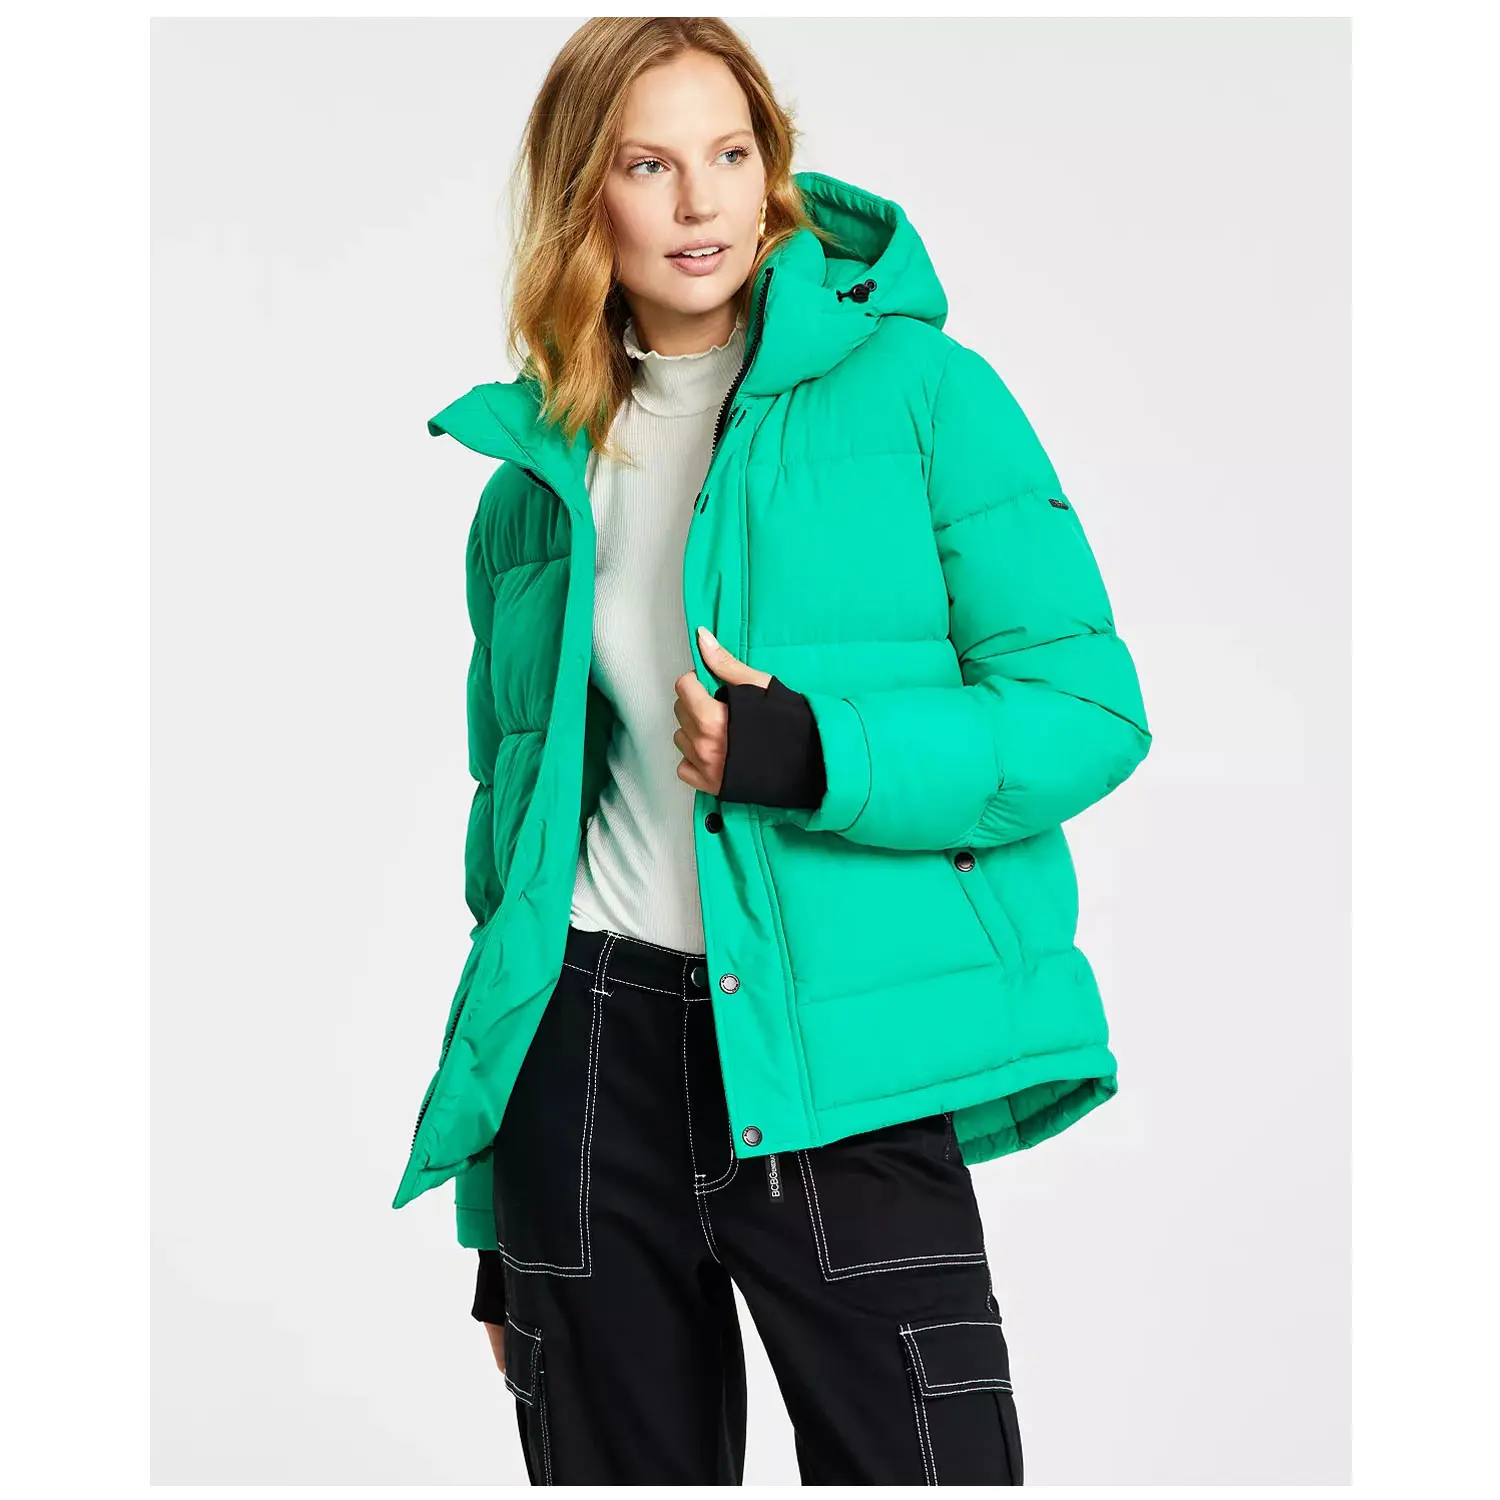 Custom Winter Puffer Jacket For woman Stand Collar Casual Outwear High Quality Coats Padded Men Jacket